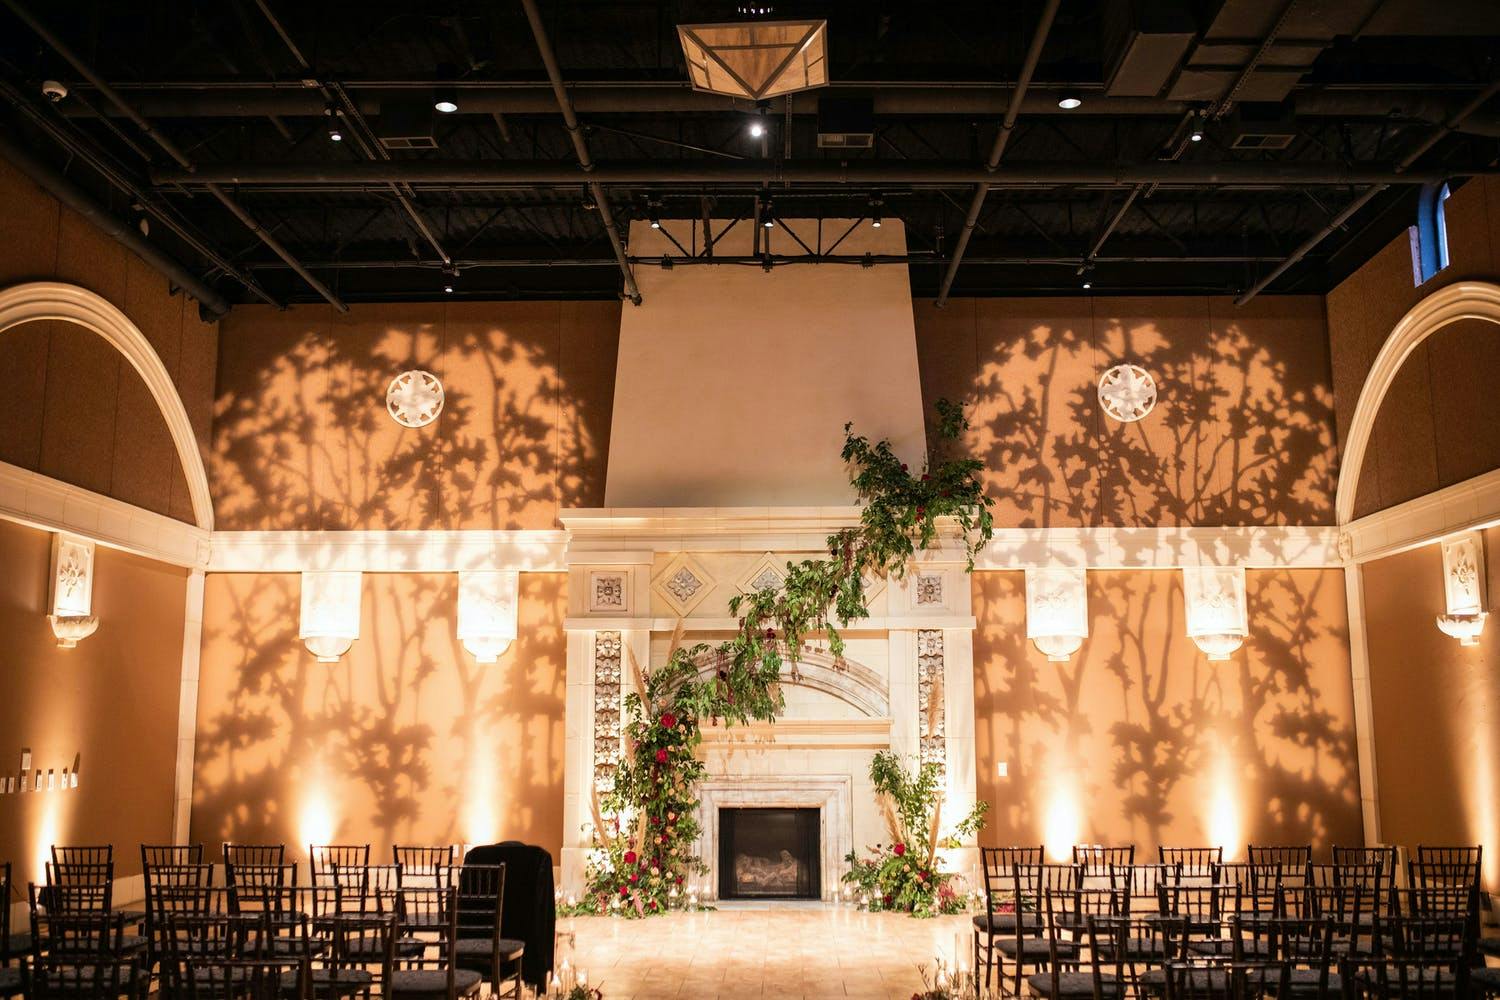 Rustic Winter Wedding Ceremony with Forest Projection Mapping in Background | PartySlate